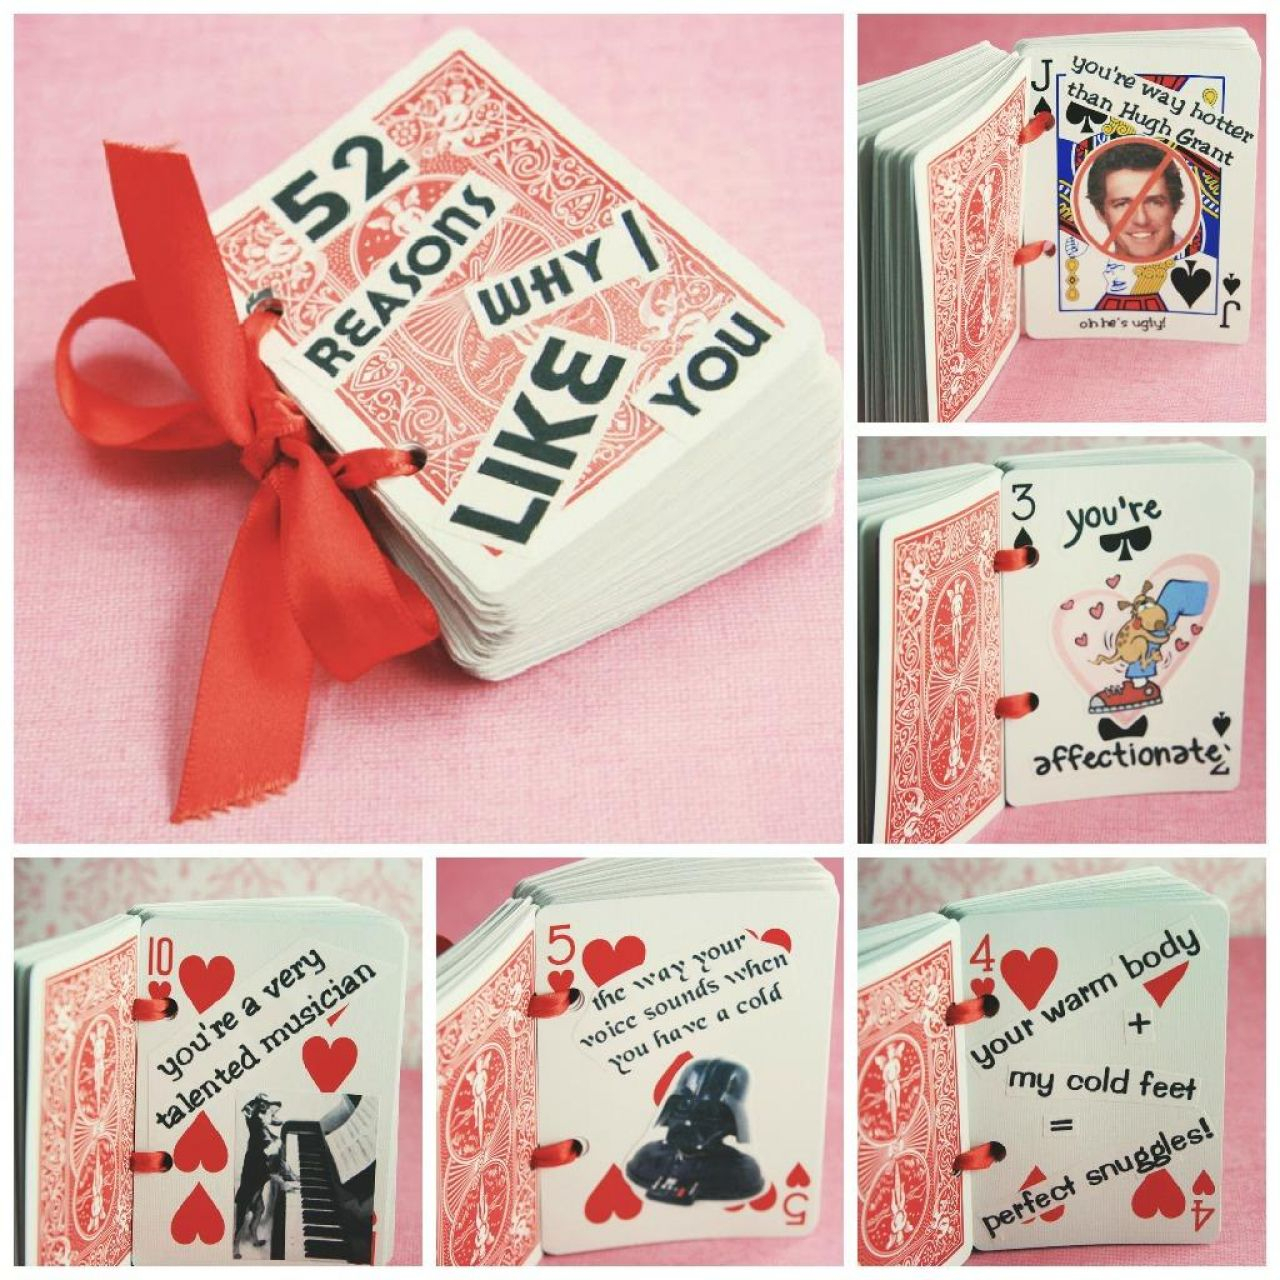 10 Wonderful Unique Ideas For Valentines Day For Him cute valentines day gifts for him 2022